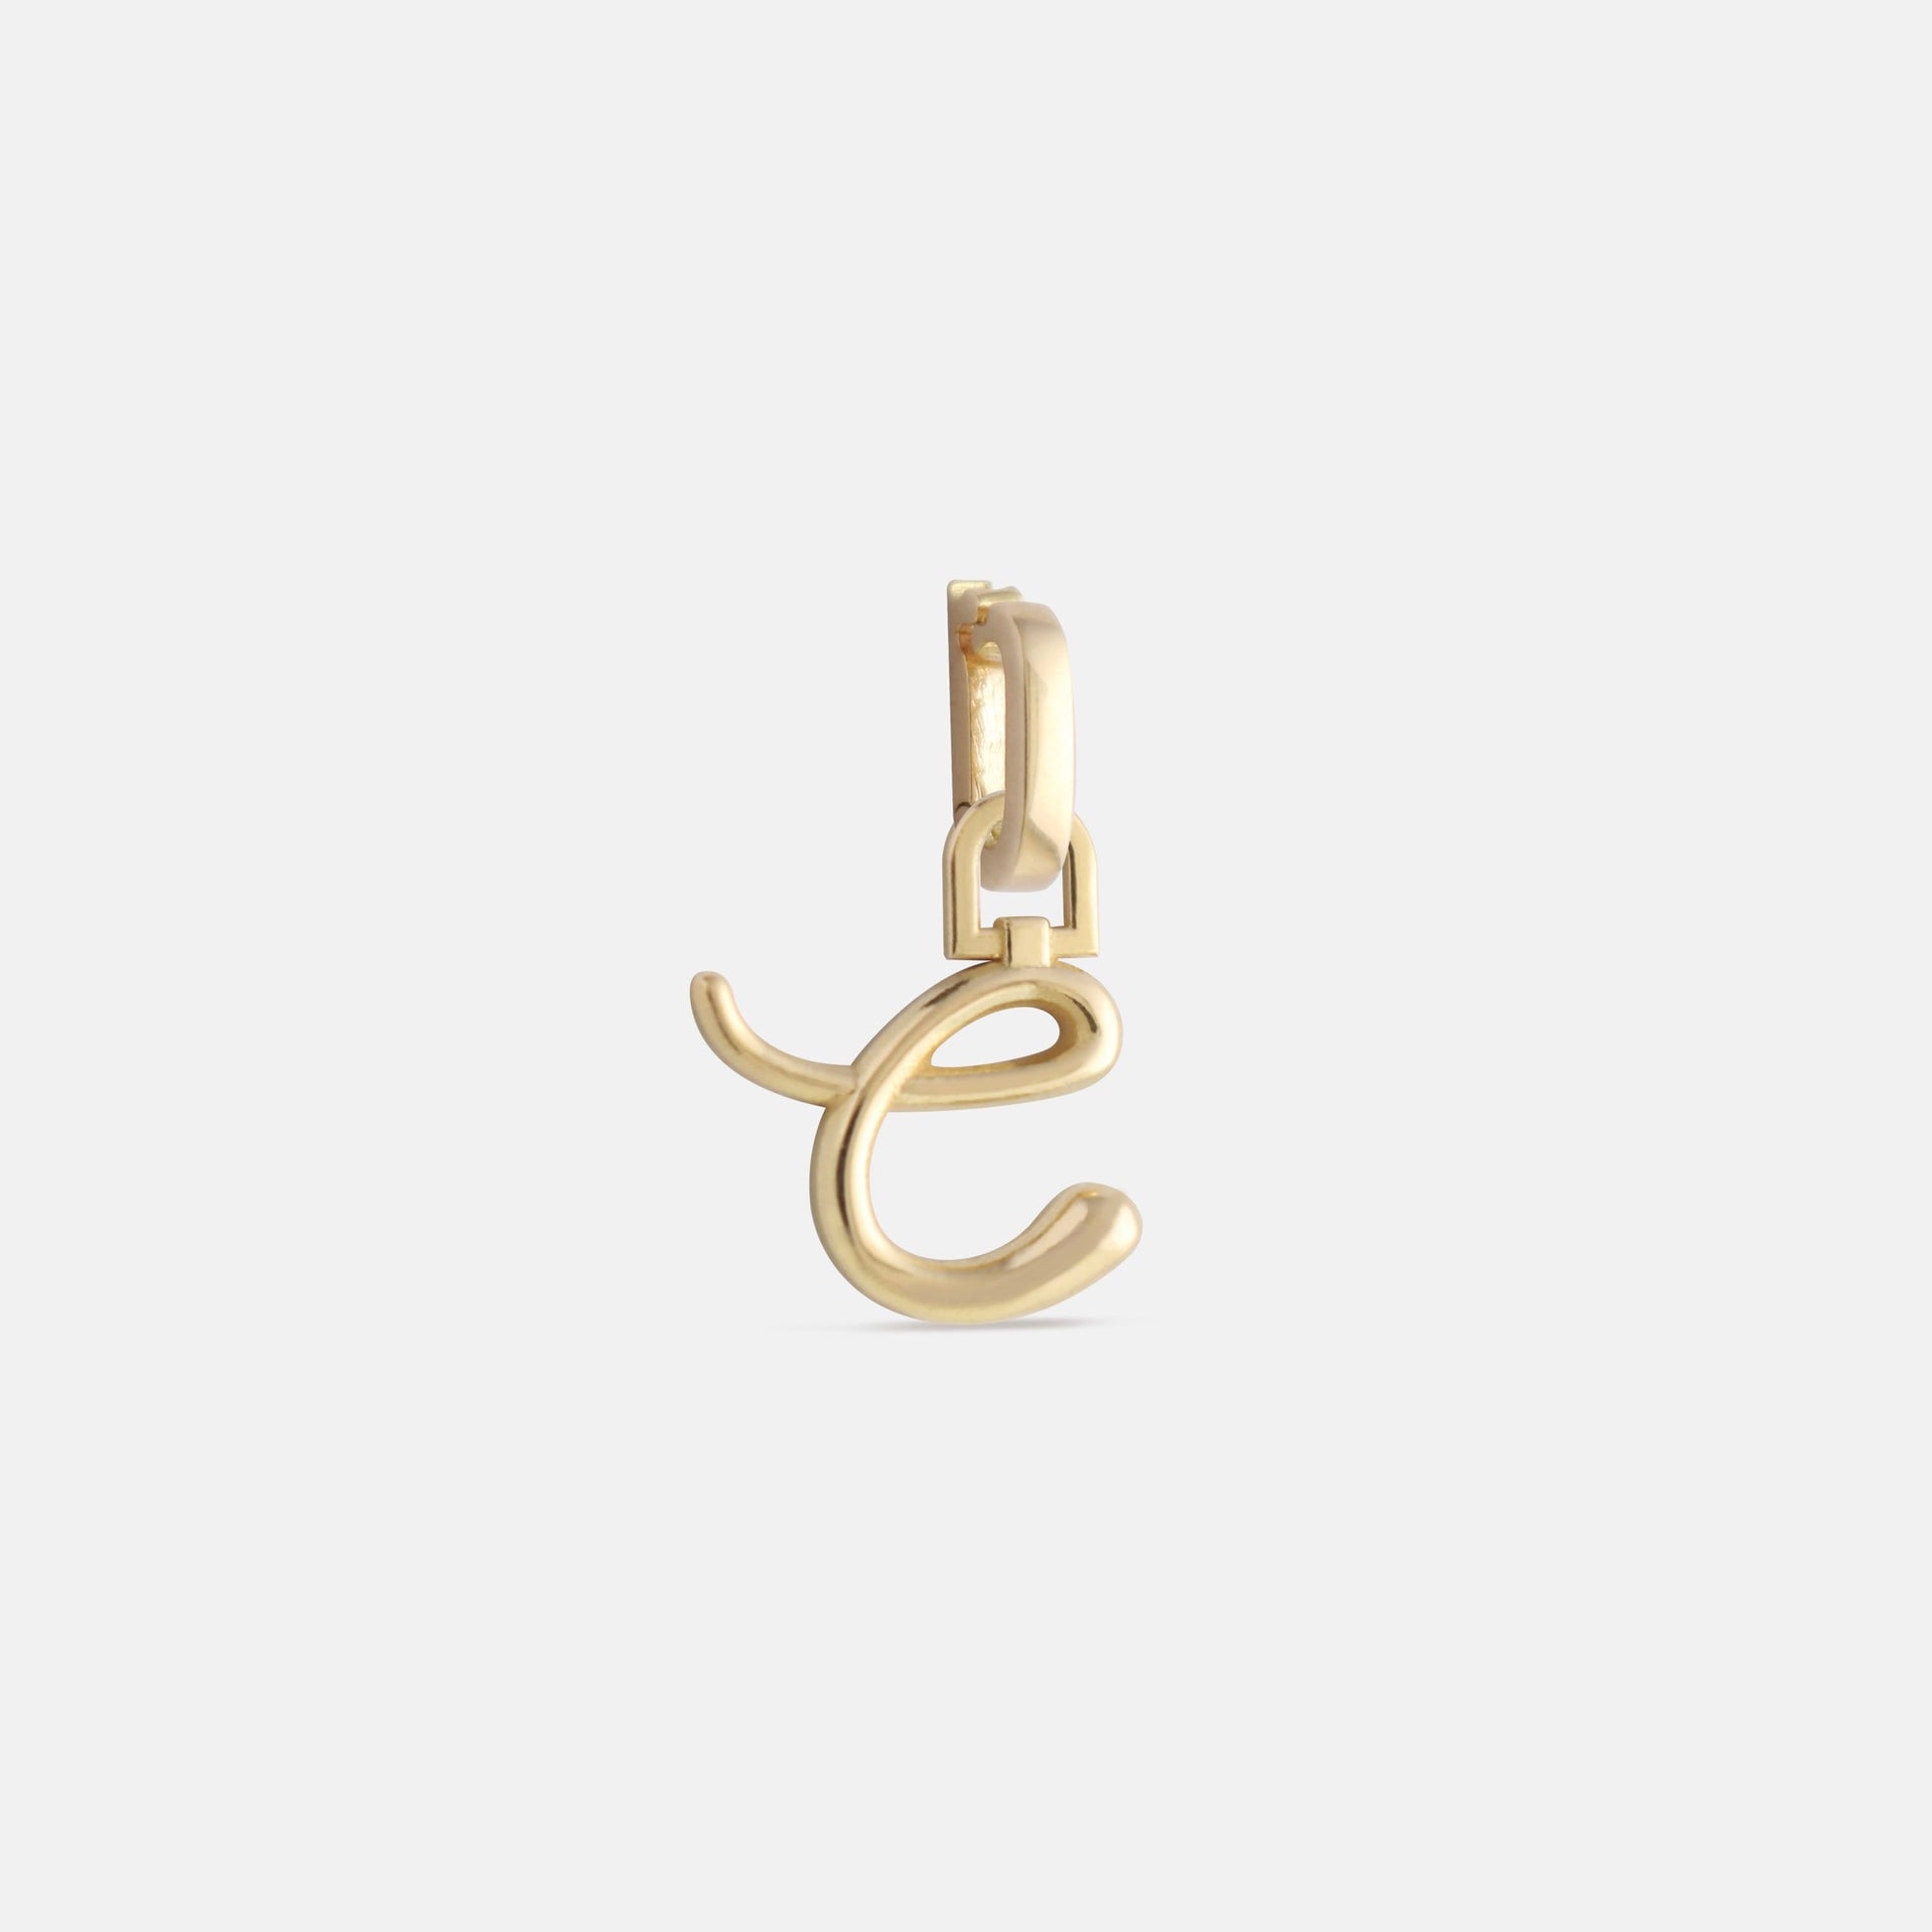 Gold and Diamond Letter Charm